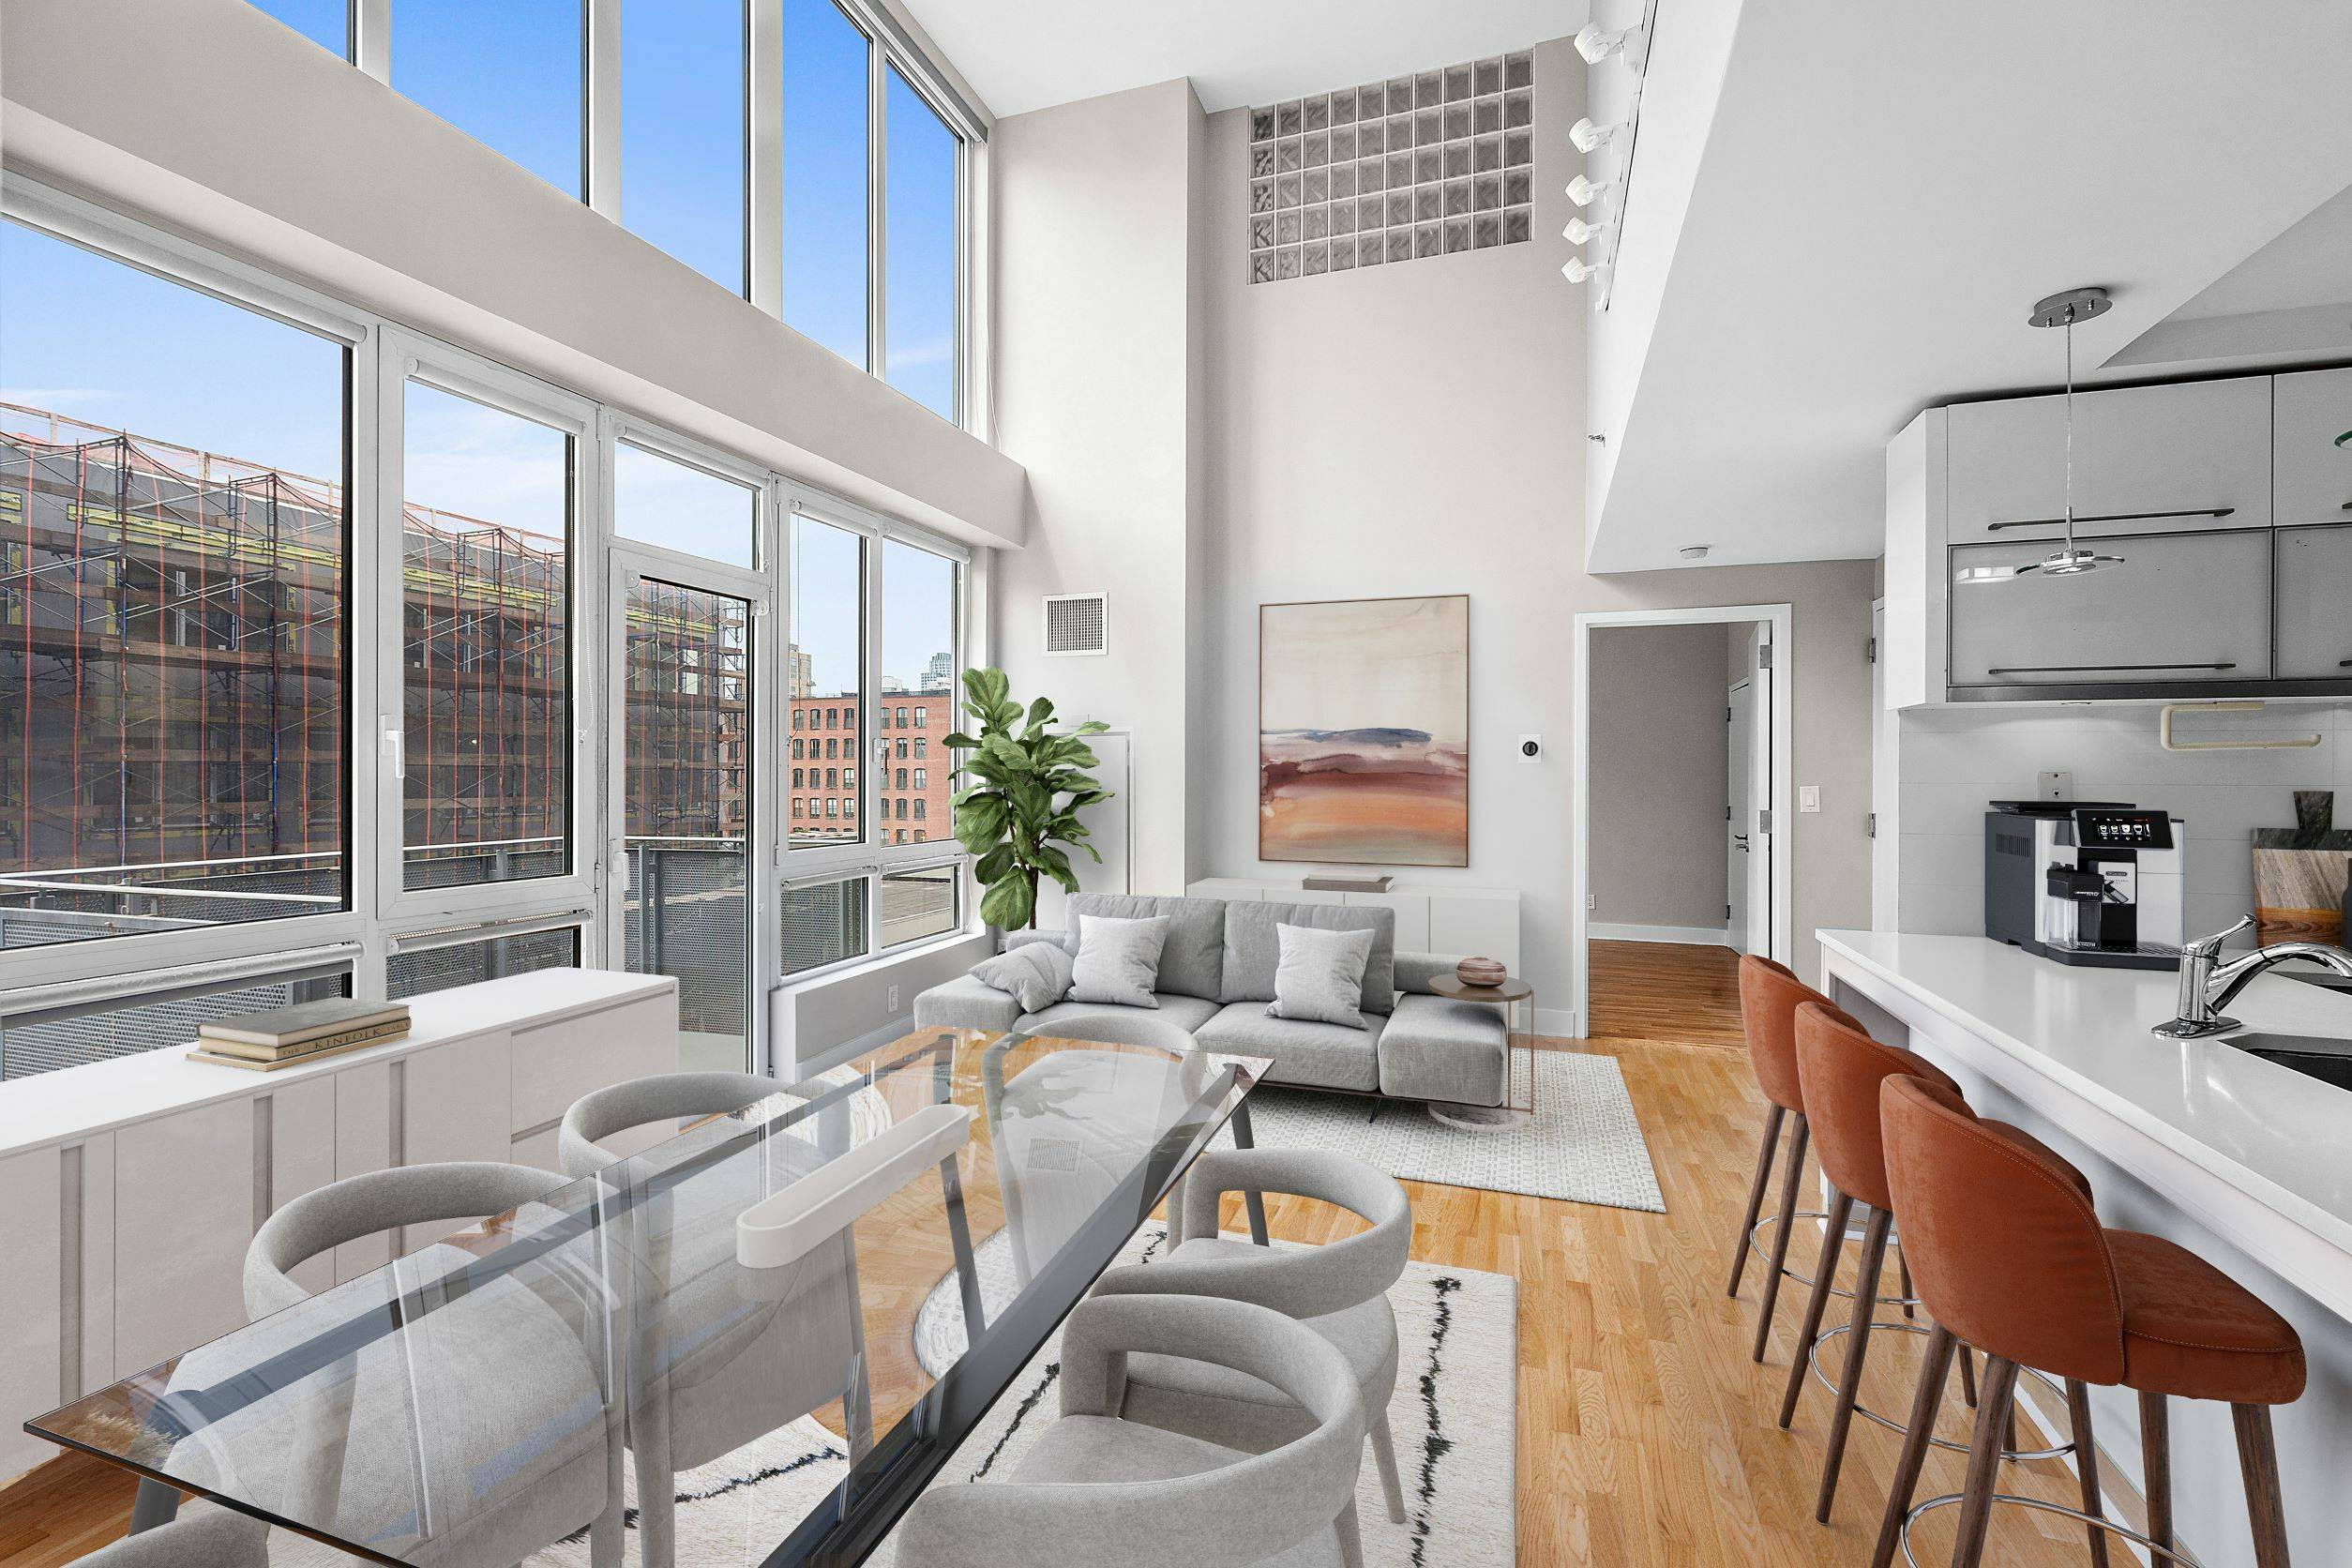 Sophisticated amp ; chic quintessential penthouse Brooklyn loft.